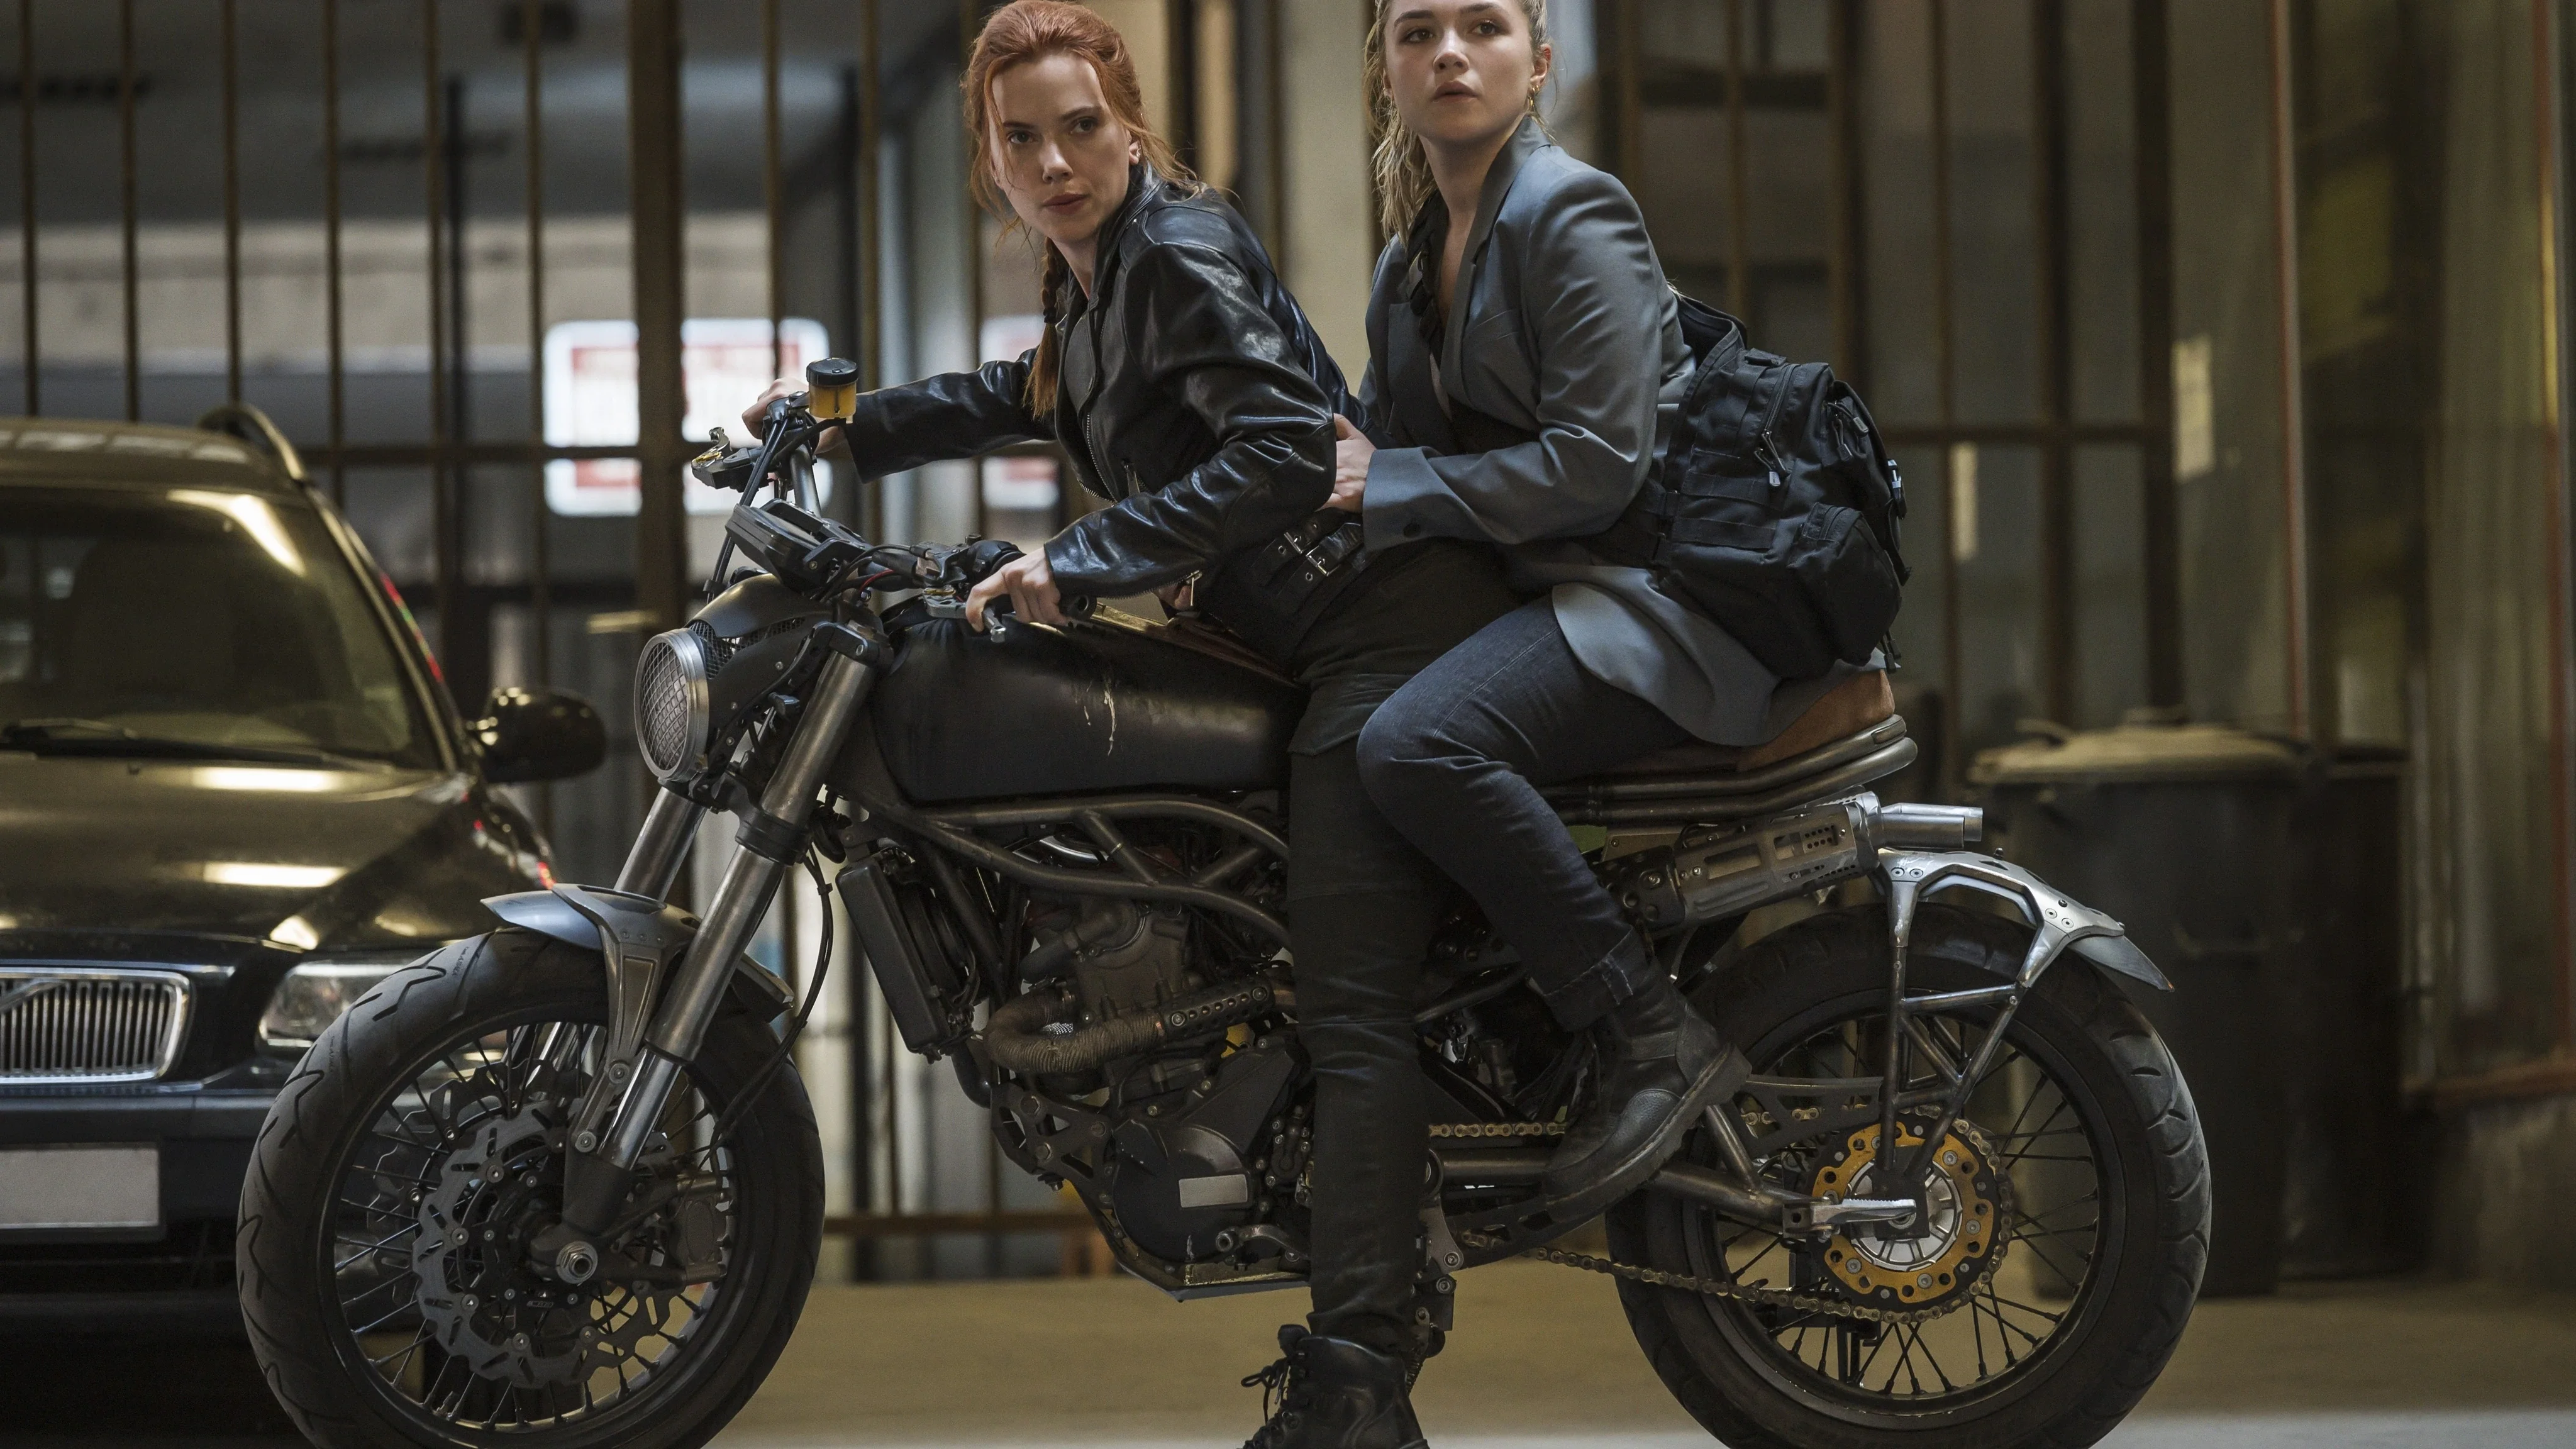 Florence Pugh and Scarlet Johansson on motorcycle in Black Widow